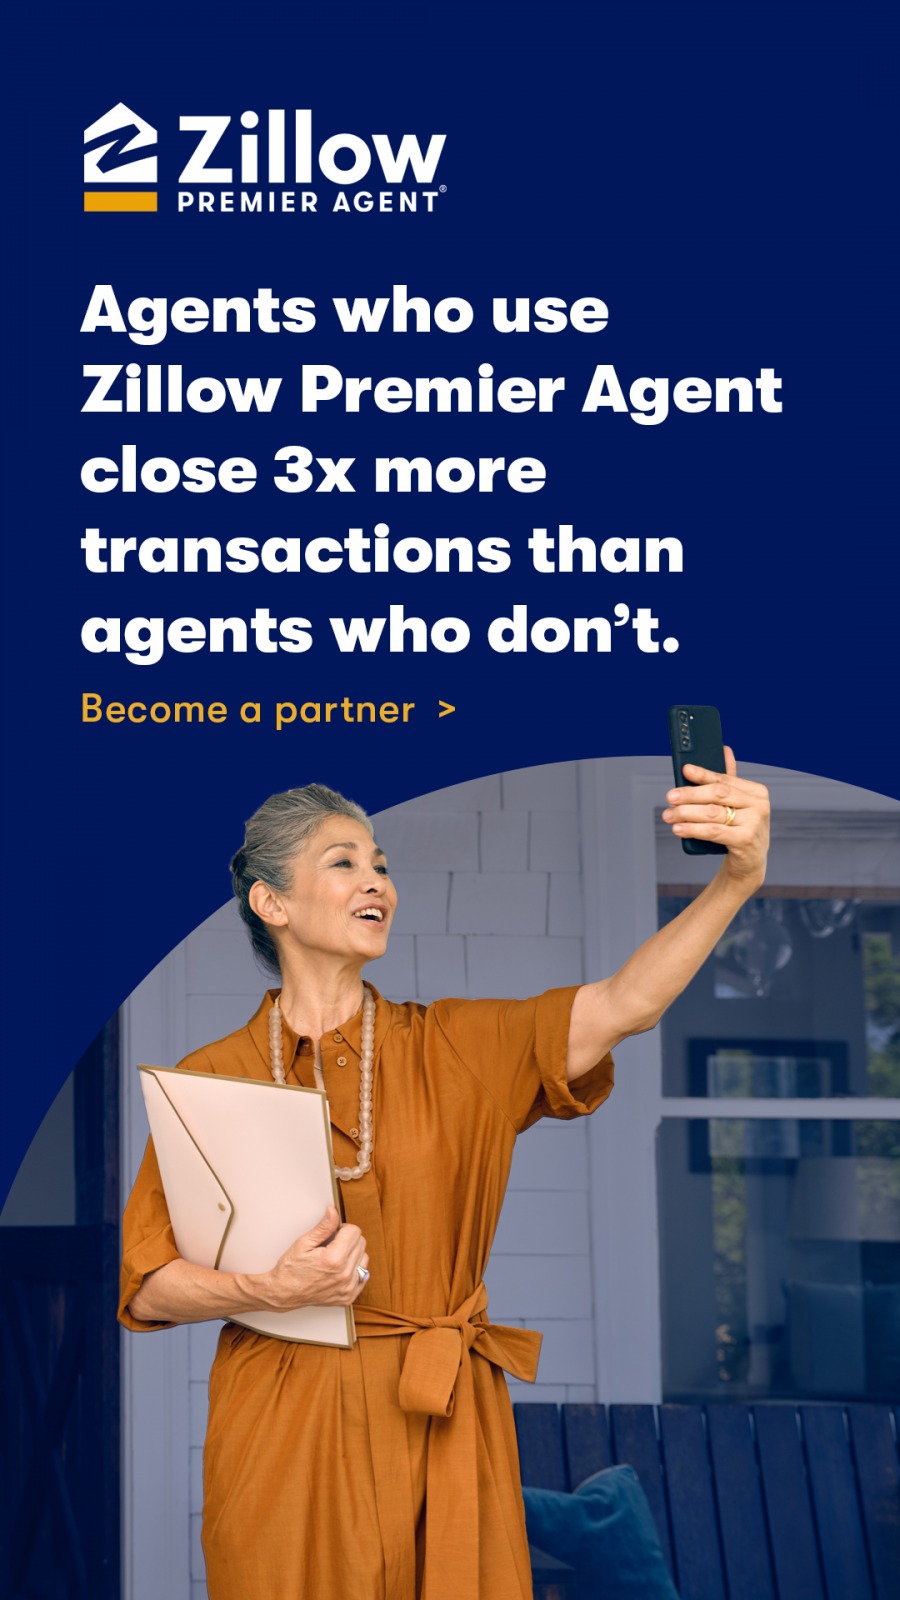 zillow real estate business plan